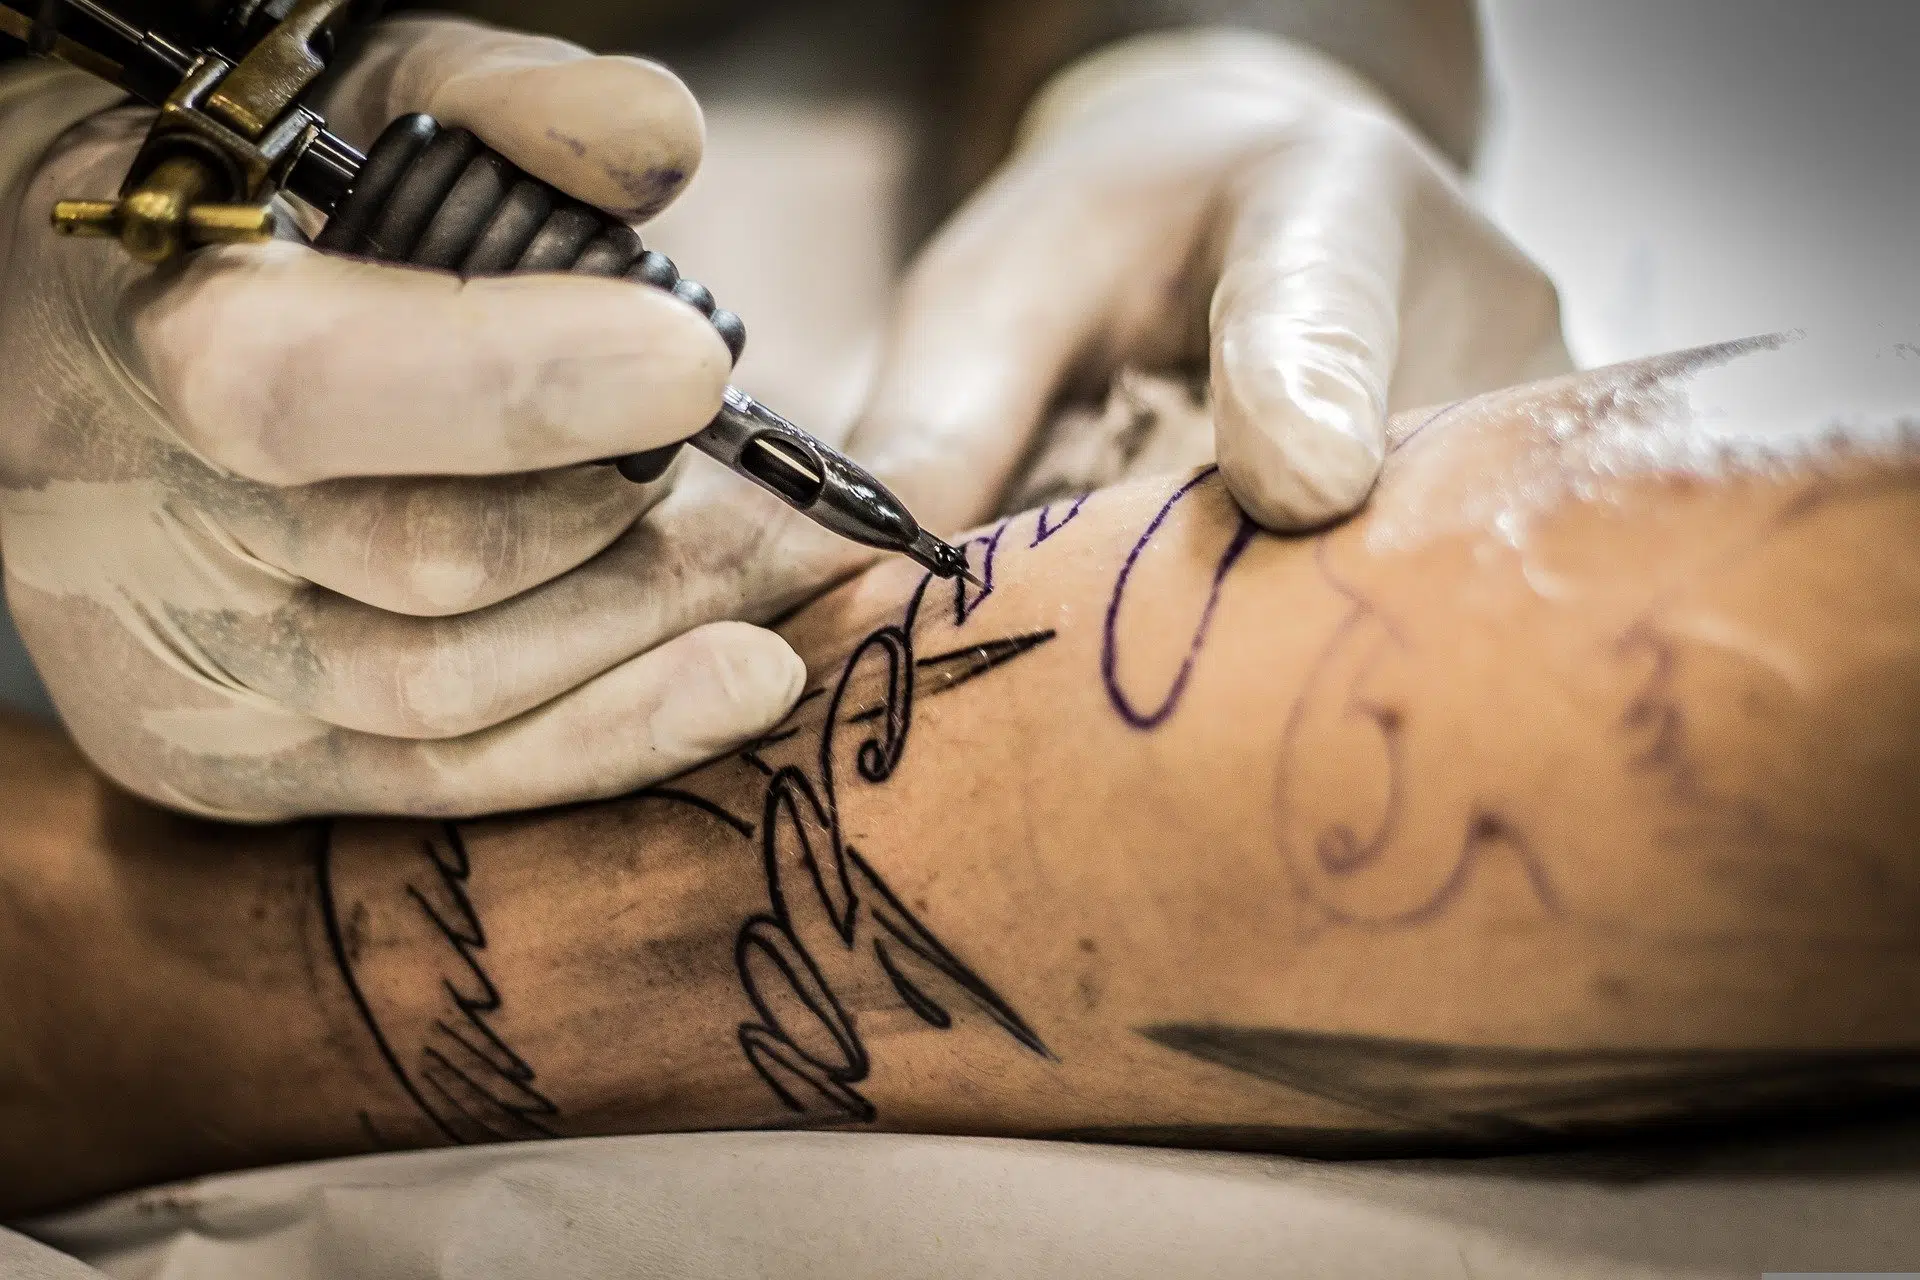 Most Painful Places to Get a Tattoo - Ink Scribd - INK SCRIBD